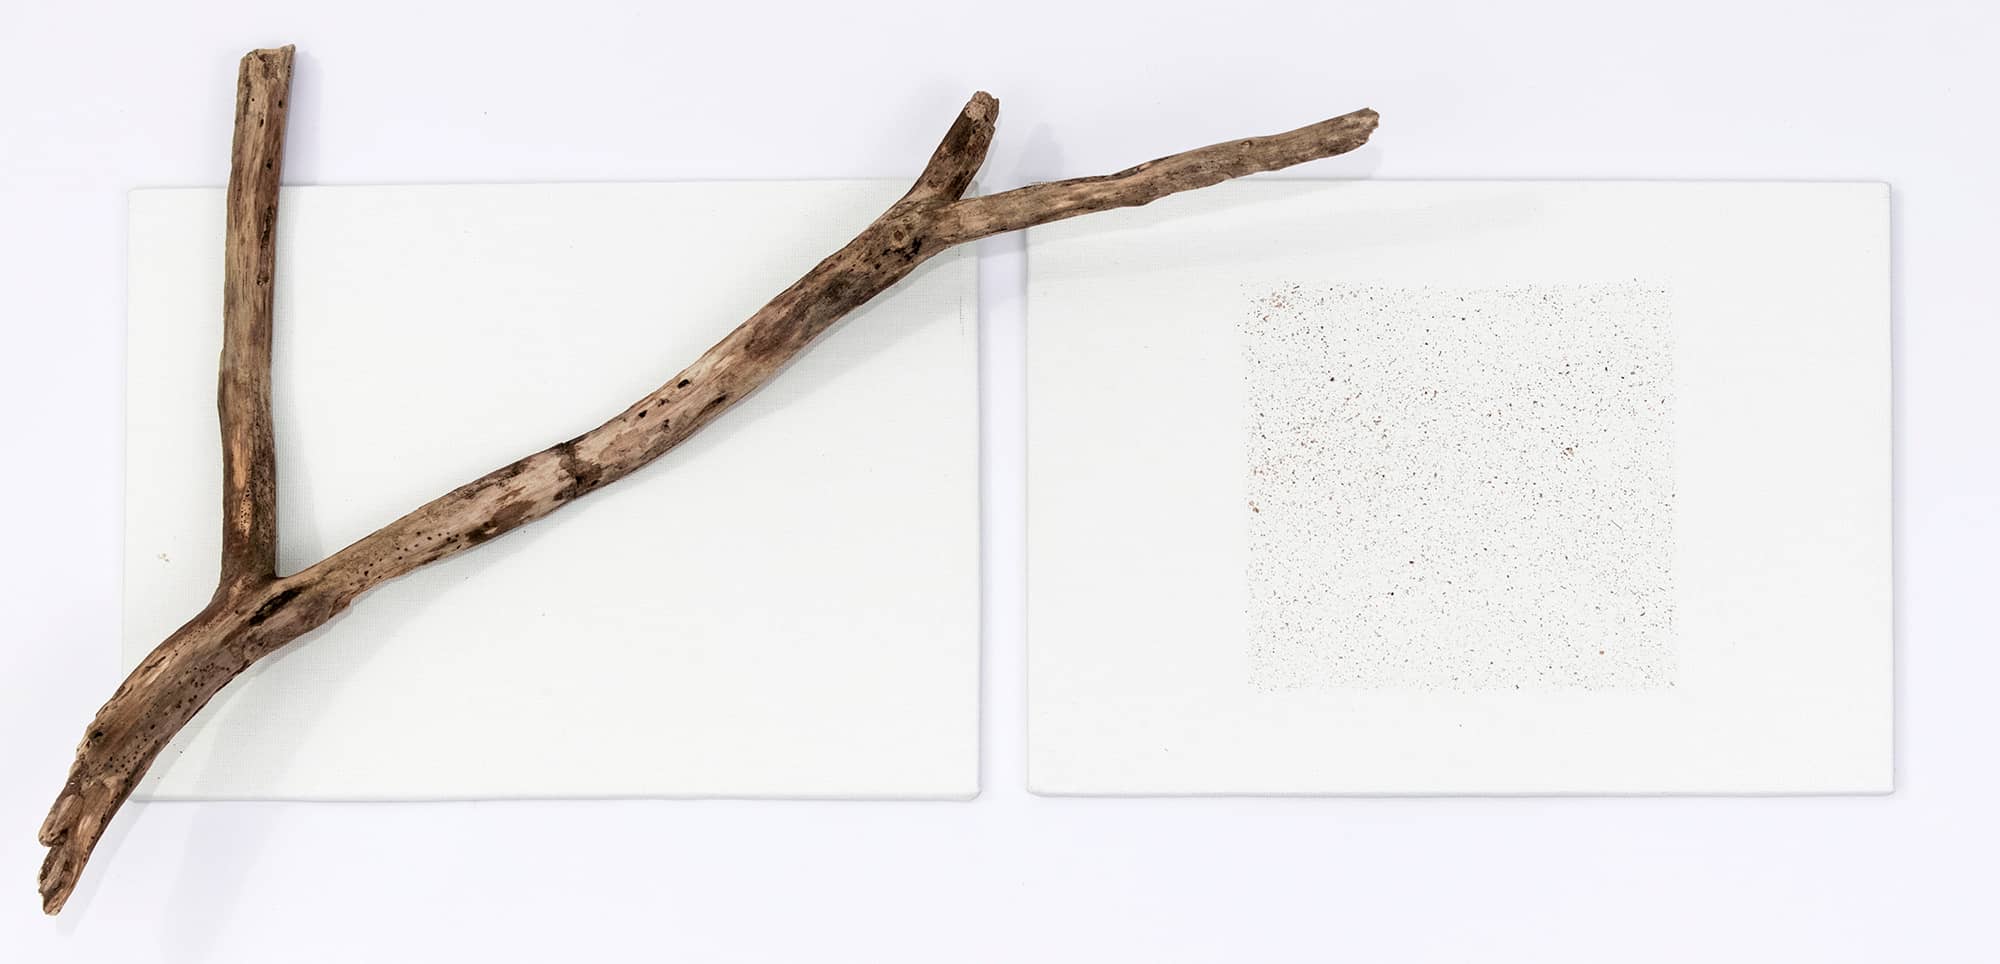 'Branch', assemblage (wood branch and natural pigment on canvas). Artwork by Francesca Virginia Coppola